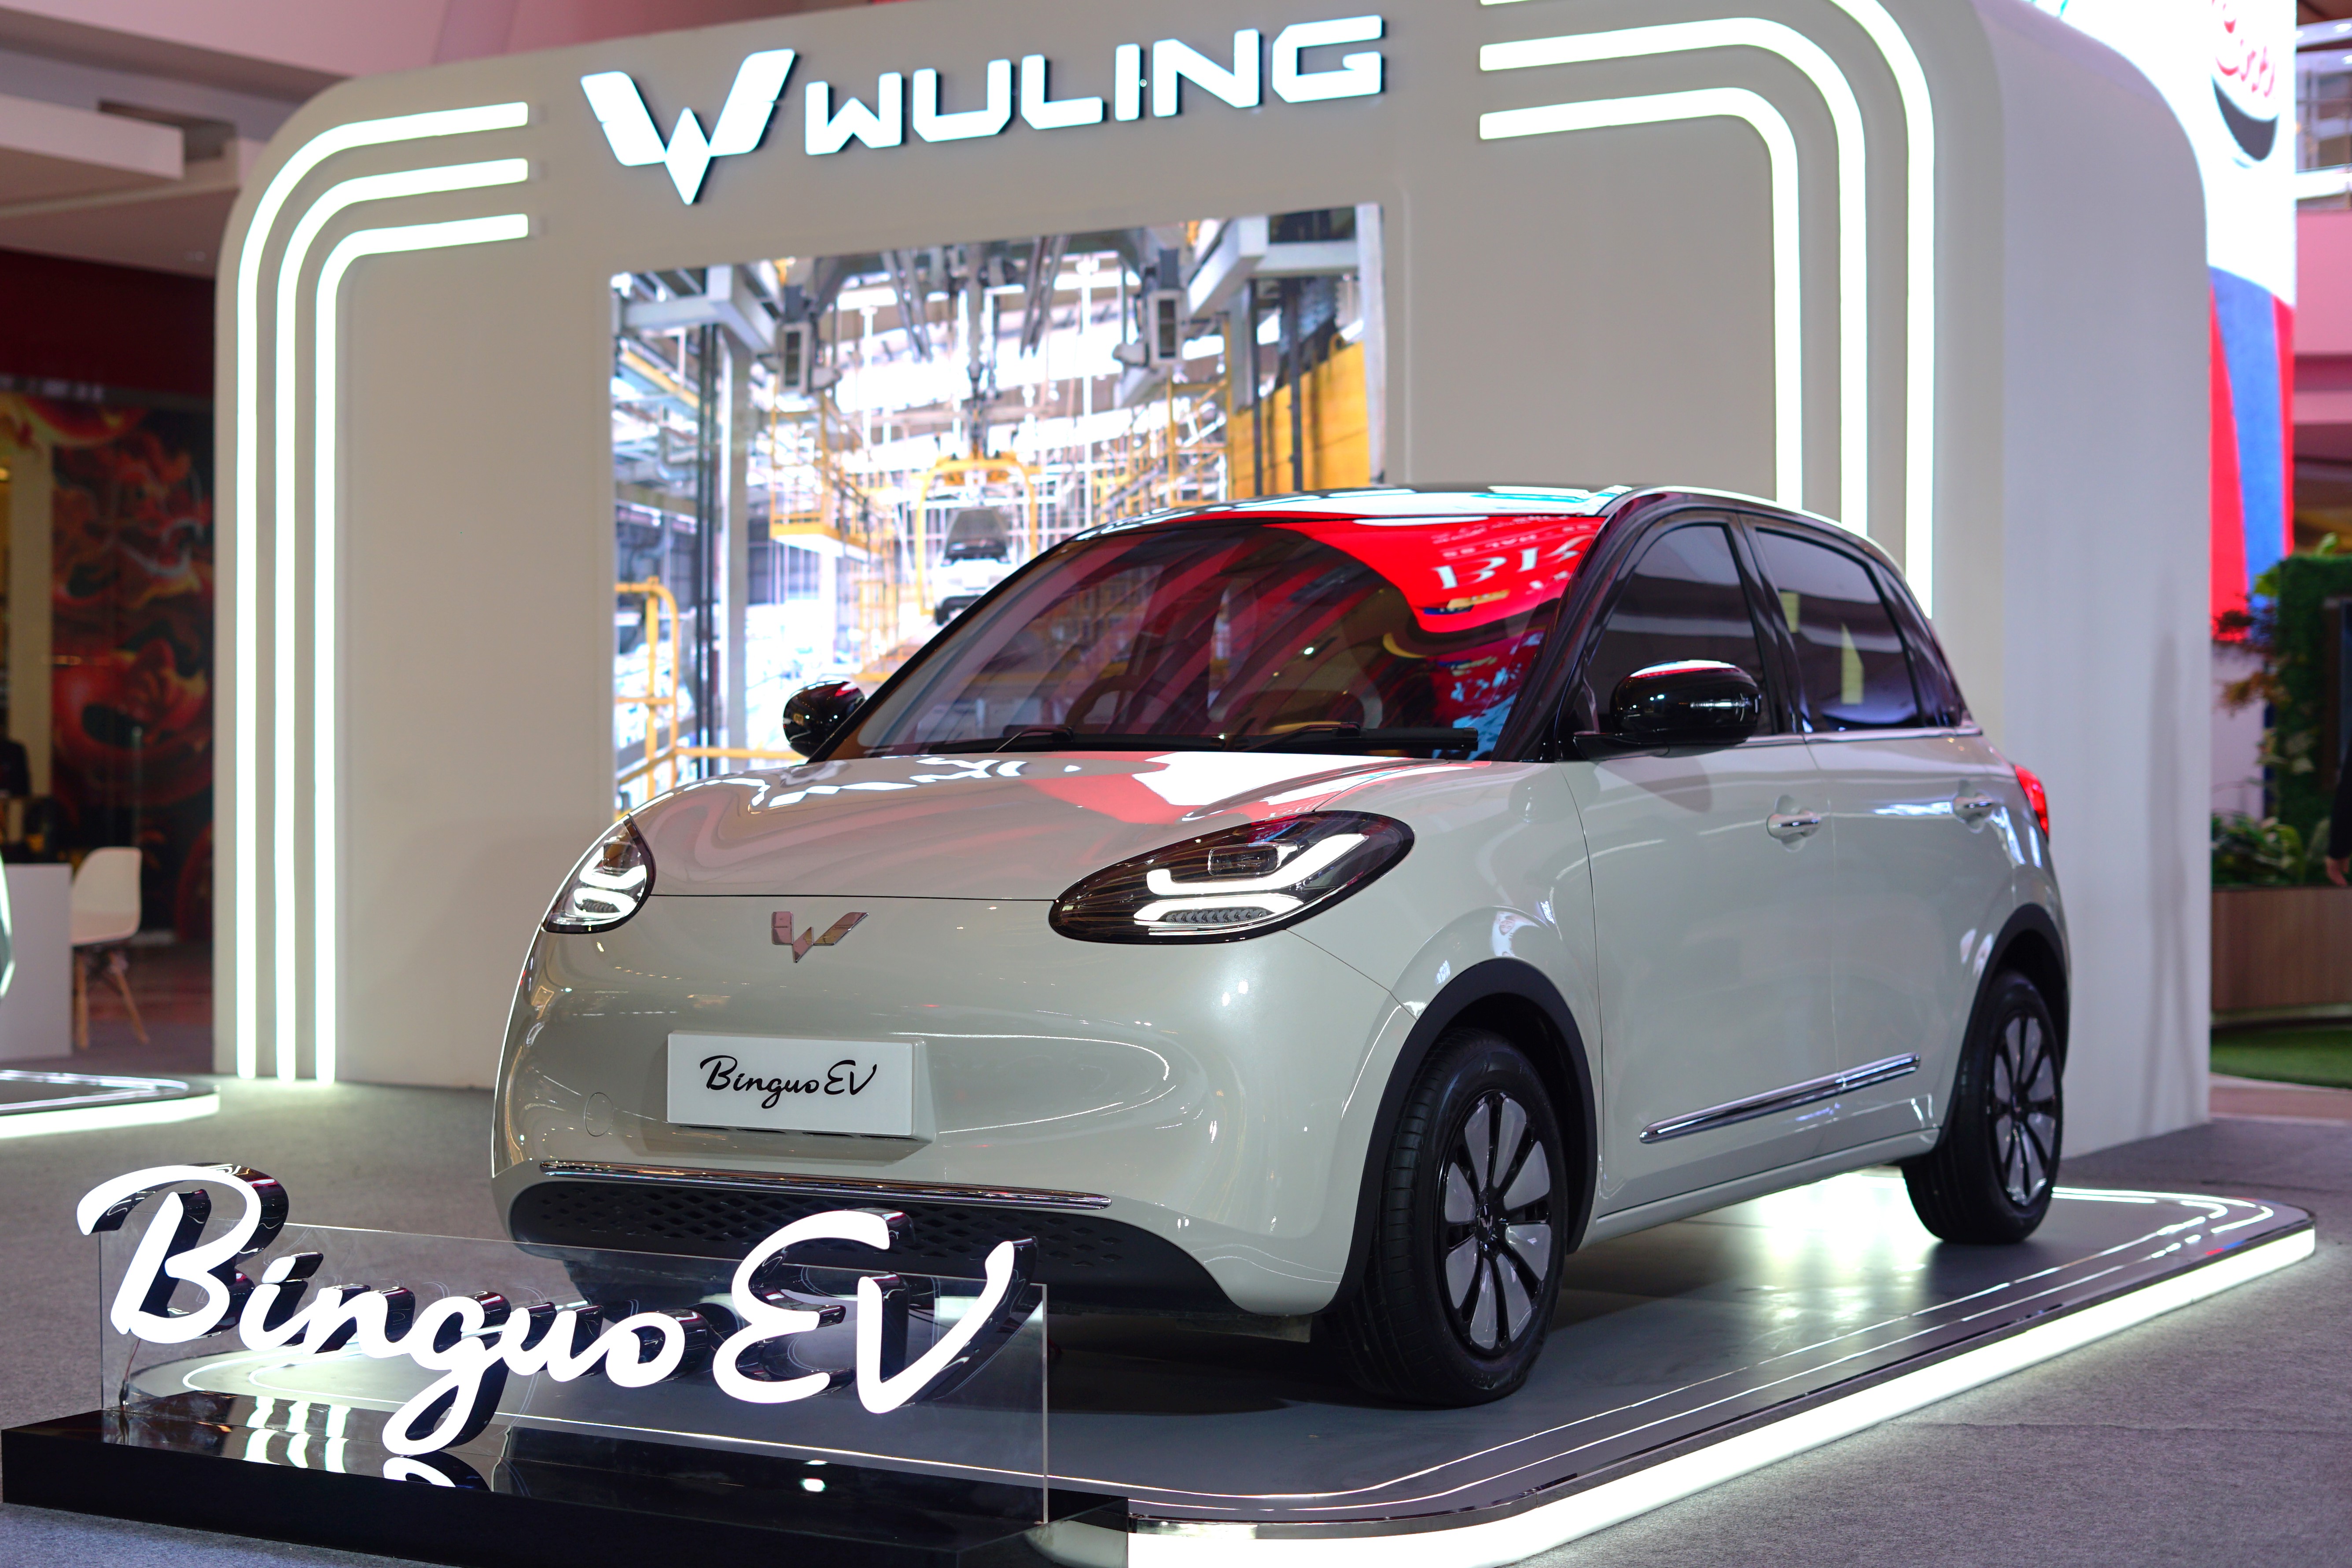 Image BinguoEV, Wuling’s Second Electric Car Officially Greets Consumers in Medan